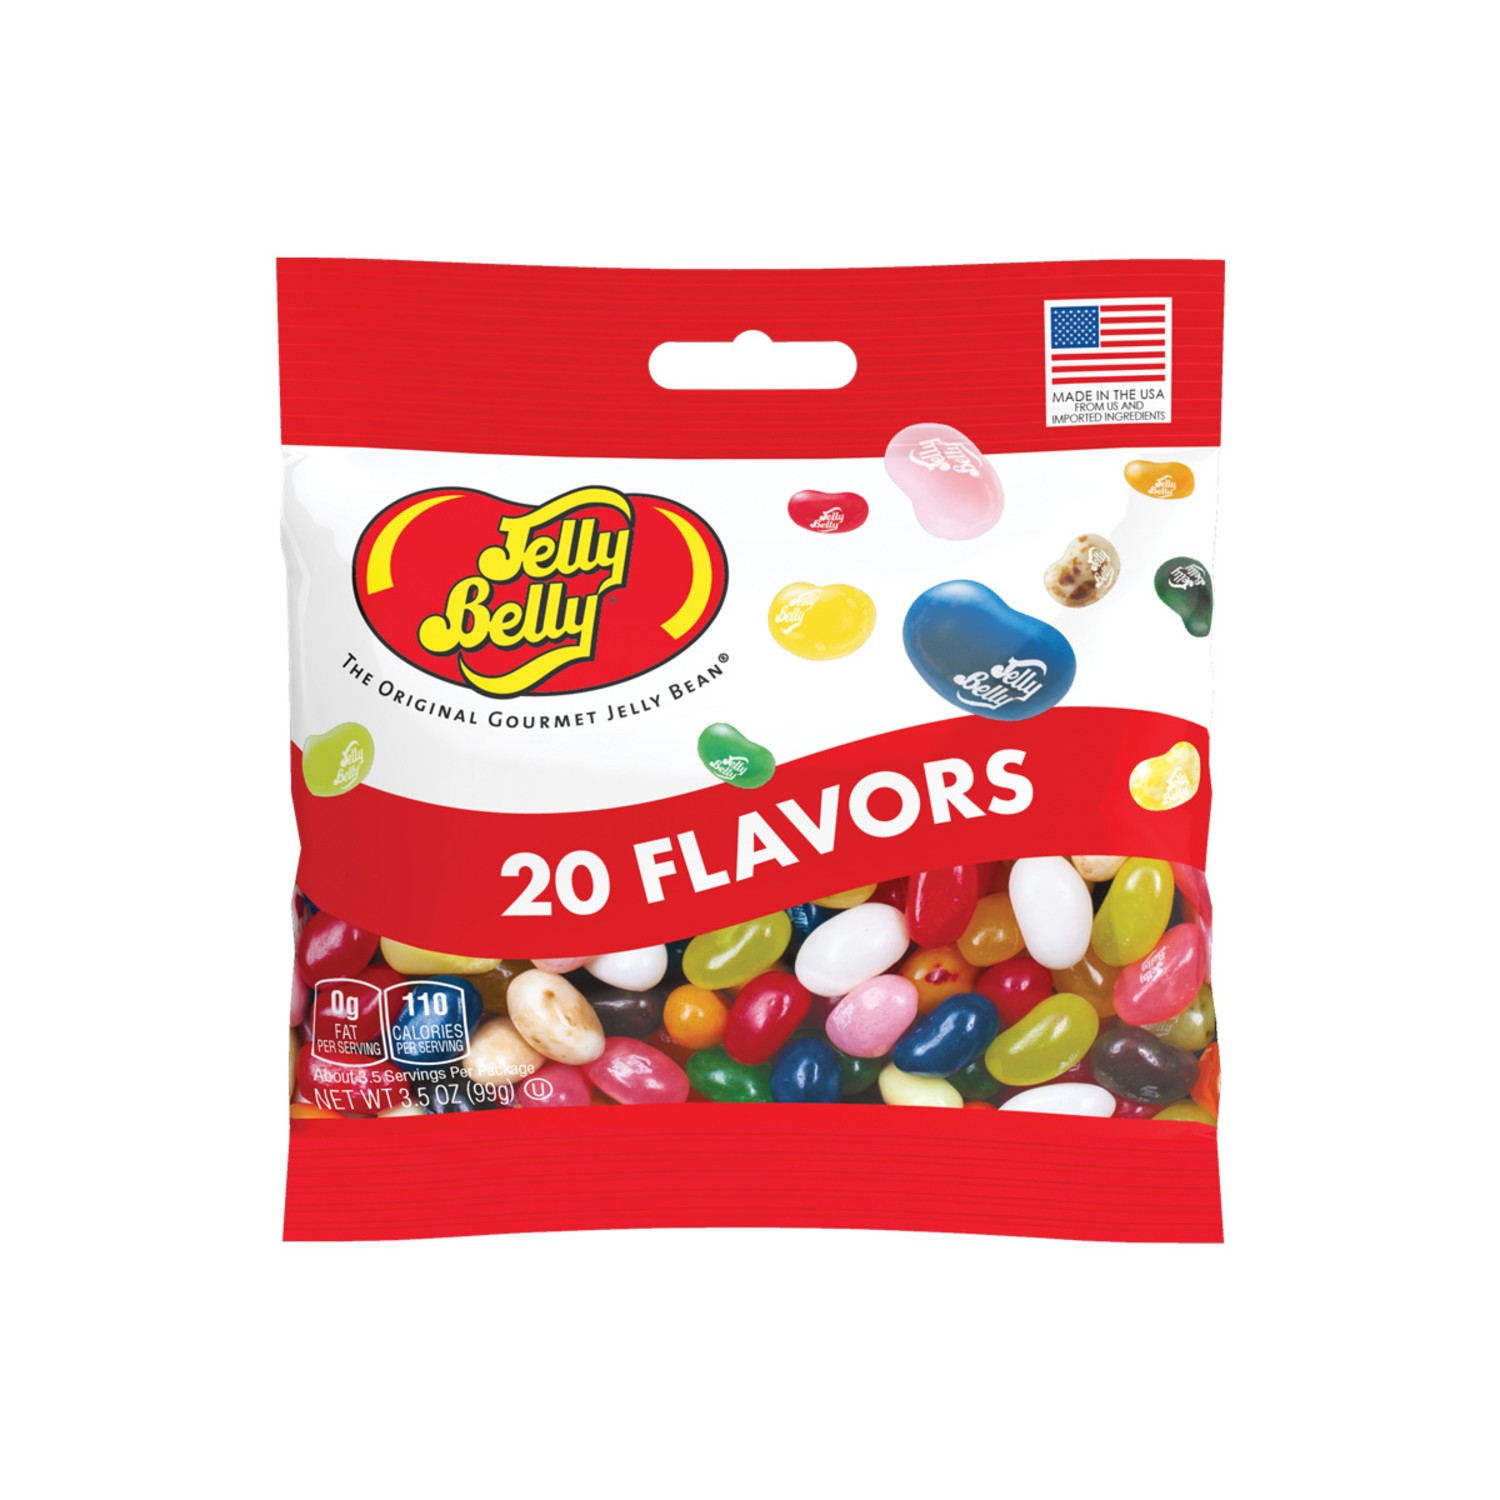 JELLY BELLY JELLY BEANS 20 FLAVORS 99g